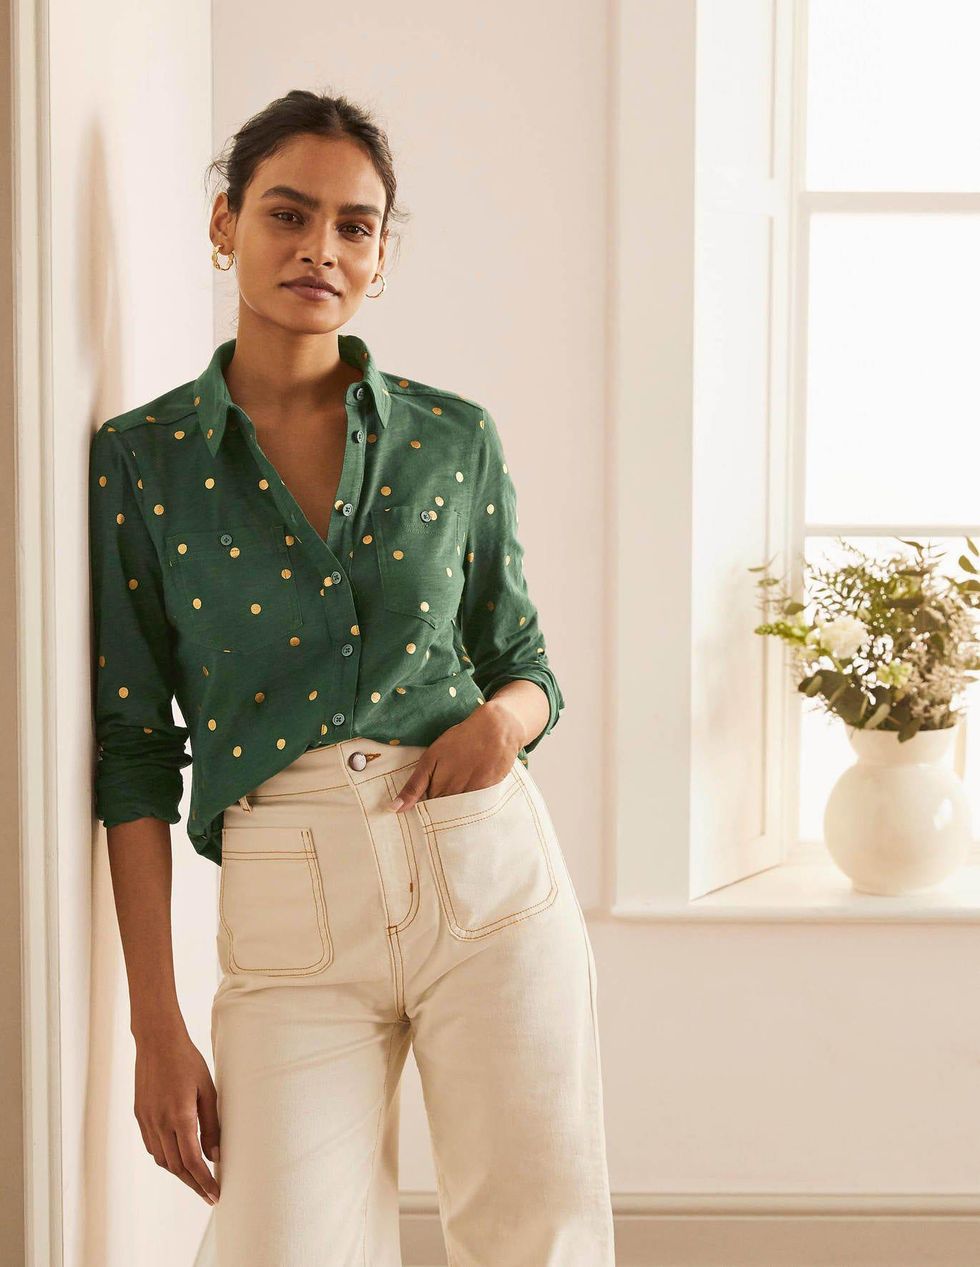 20 of the Prettiest Tops We're Eyeing For Spring - Brit + Co